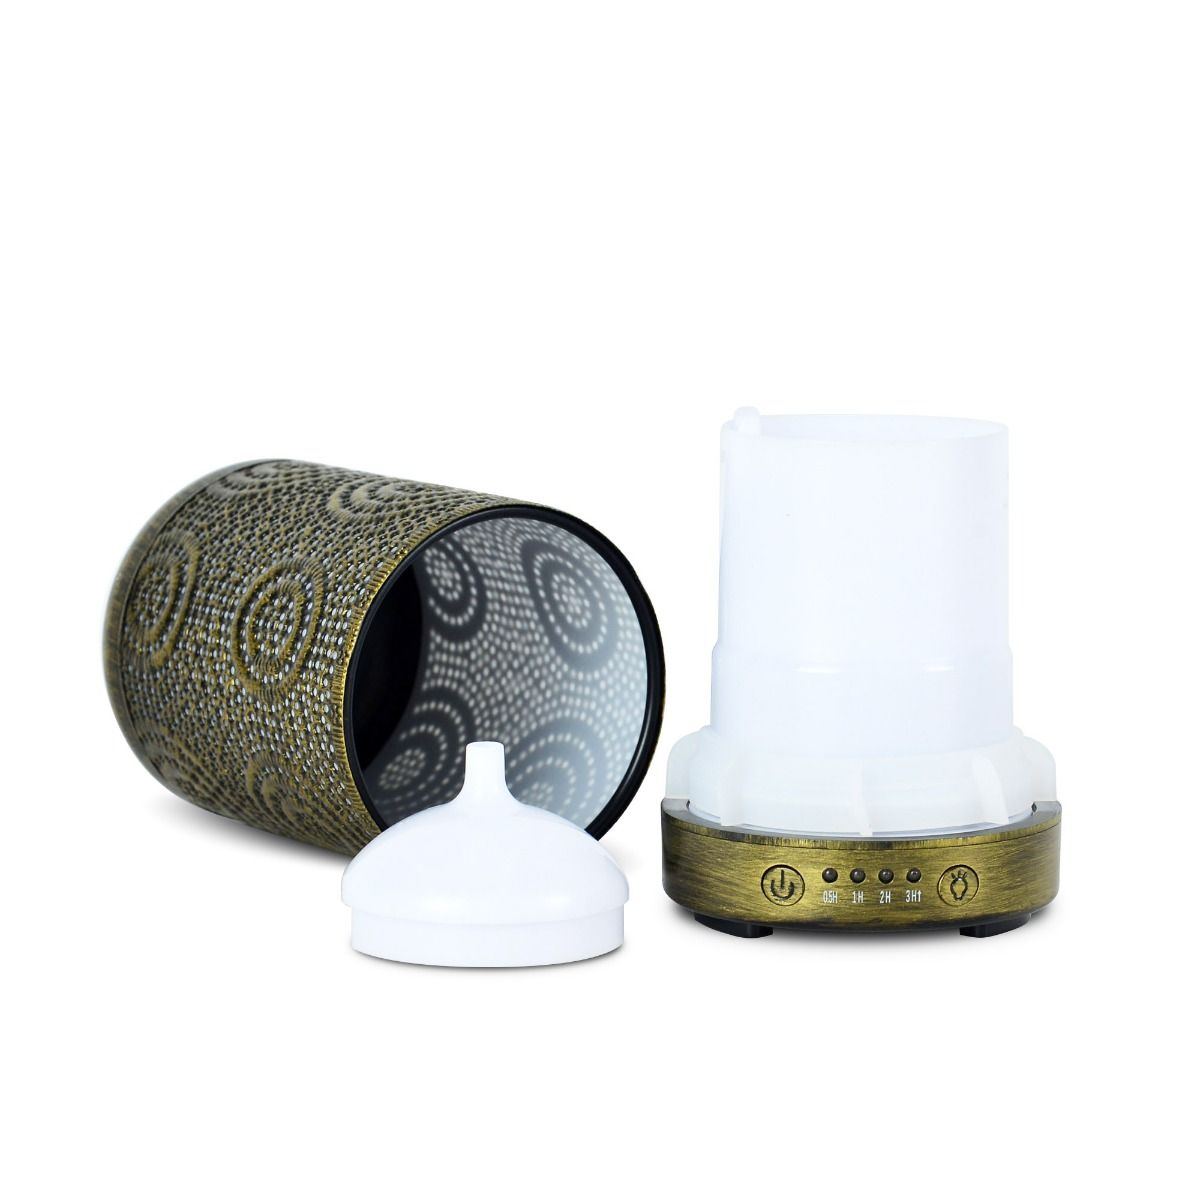 activiva 100ml Metal Essential Oil and Aroma Diffuser-Vintage Gold - BM House & Garden